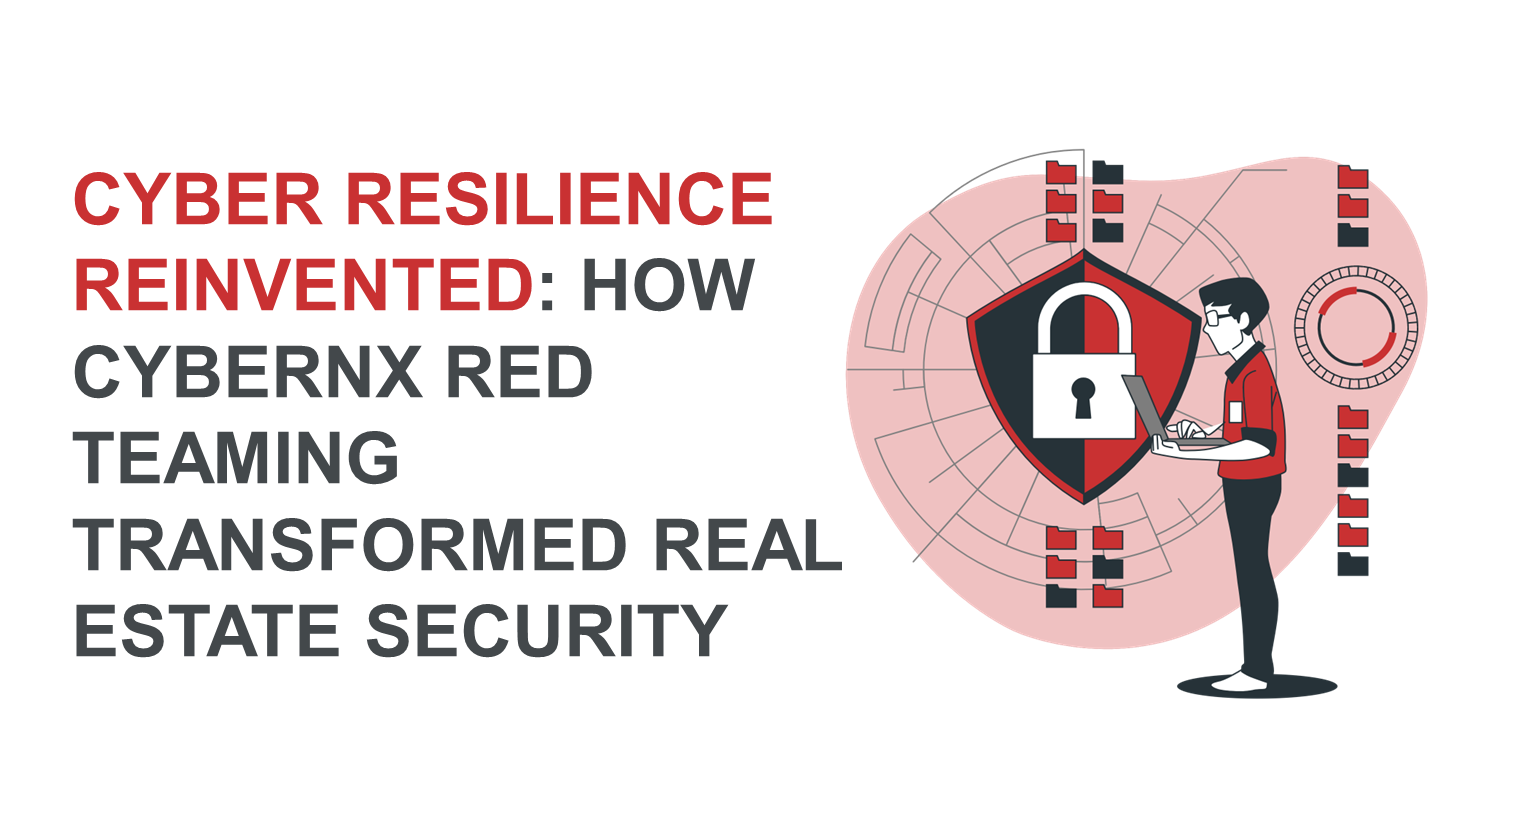 Cyber Resilience Reinvented: How CyberNX Red Teaming Transformed Real Estate Security